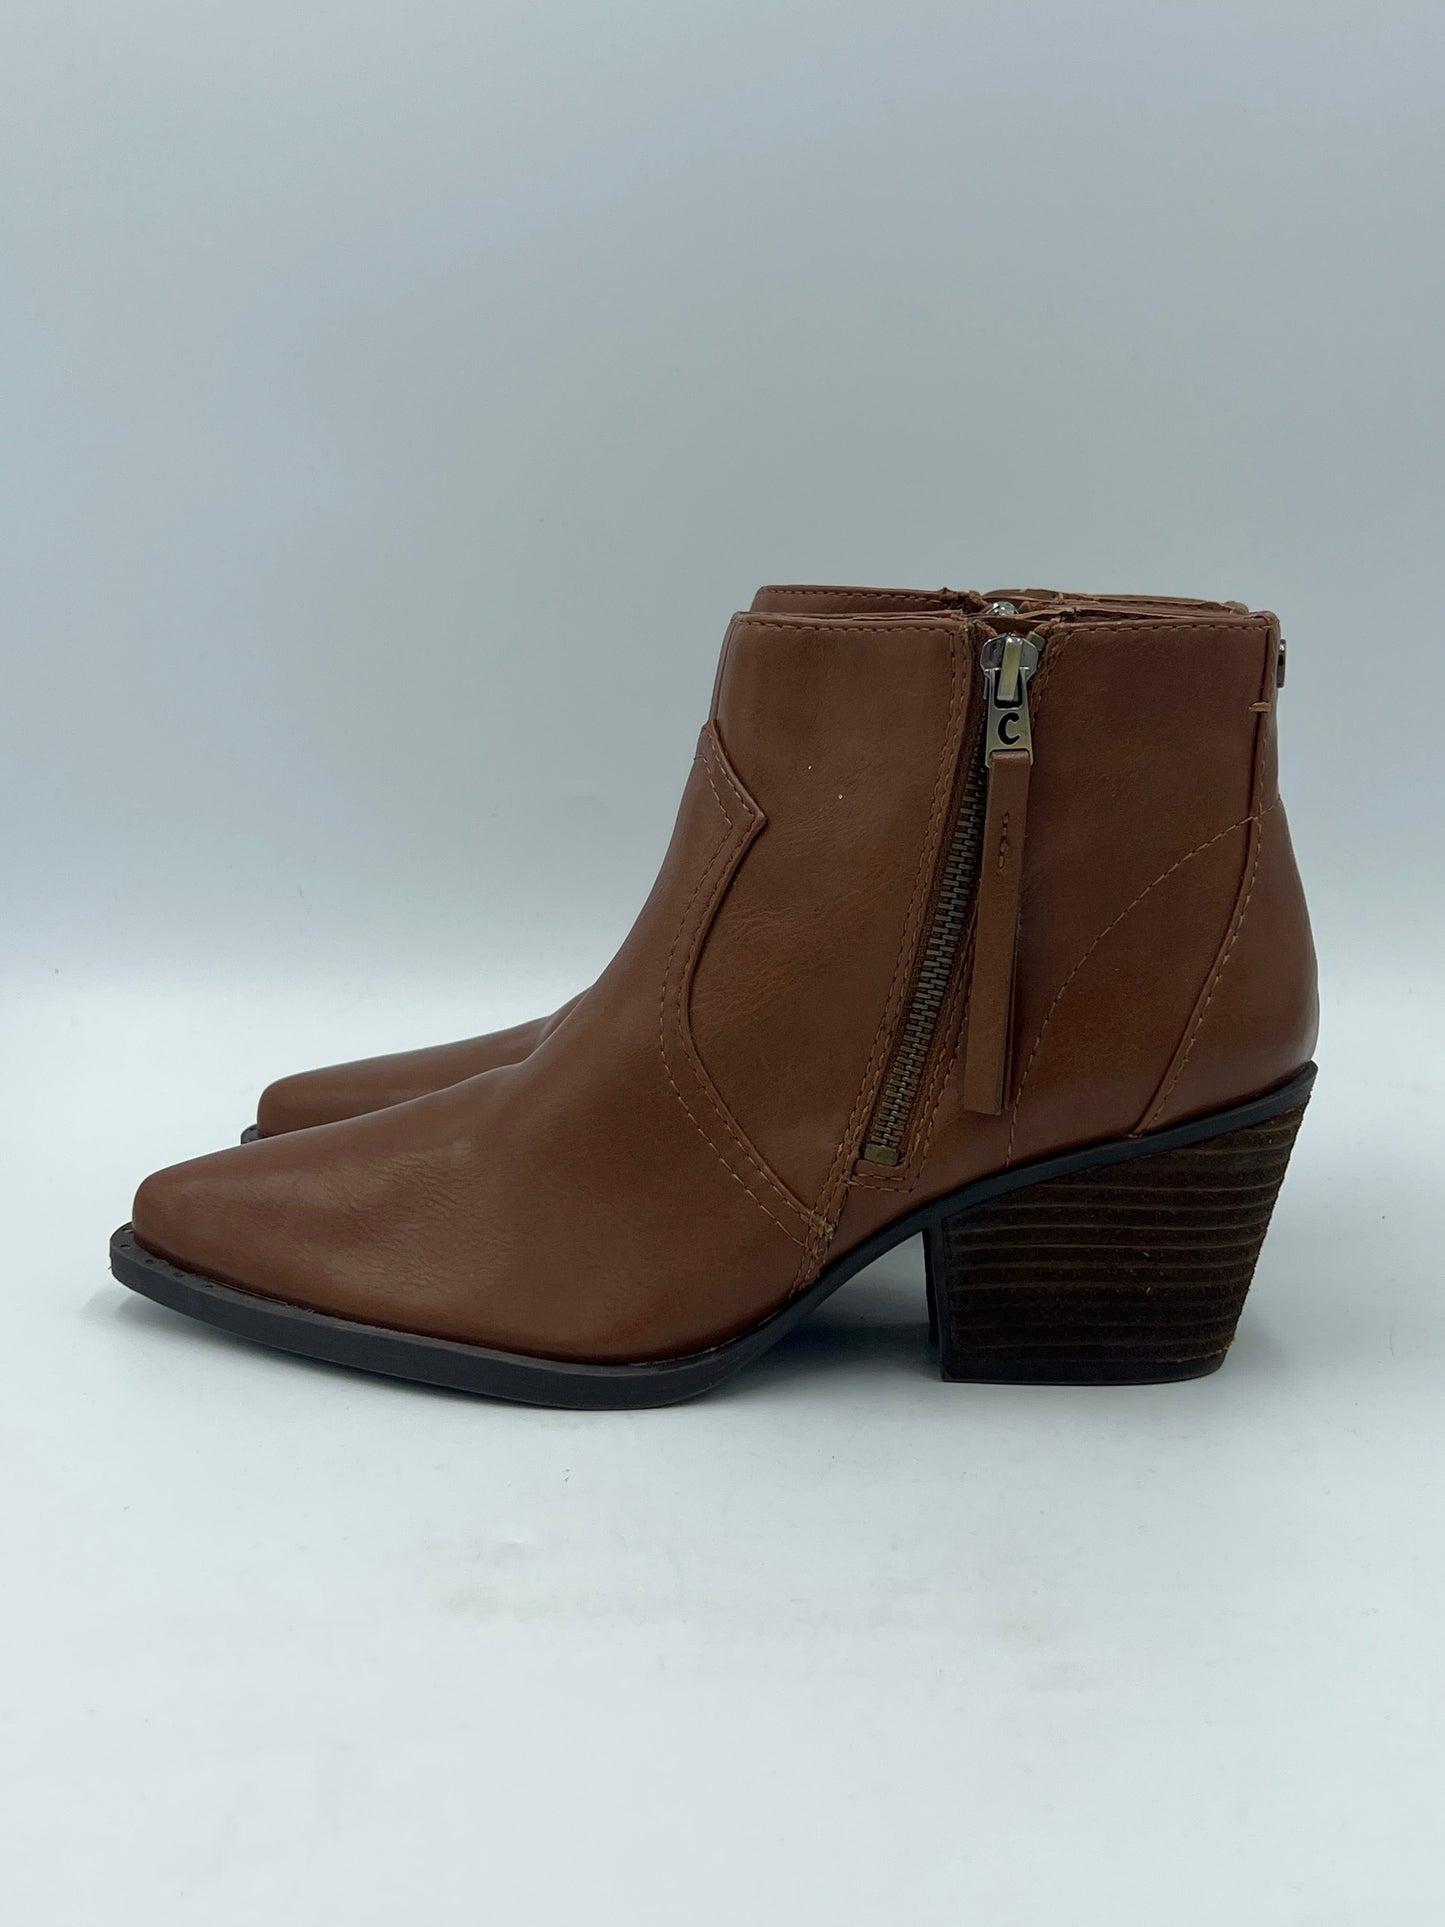 Boots Ankle Heels By Circus By Sam Edelman  Size: 7.5